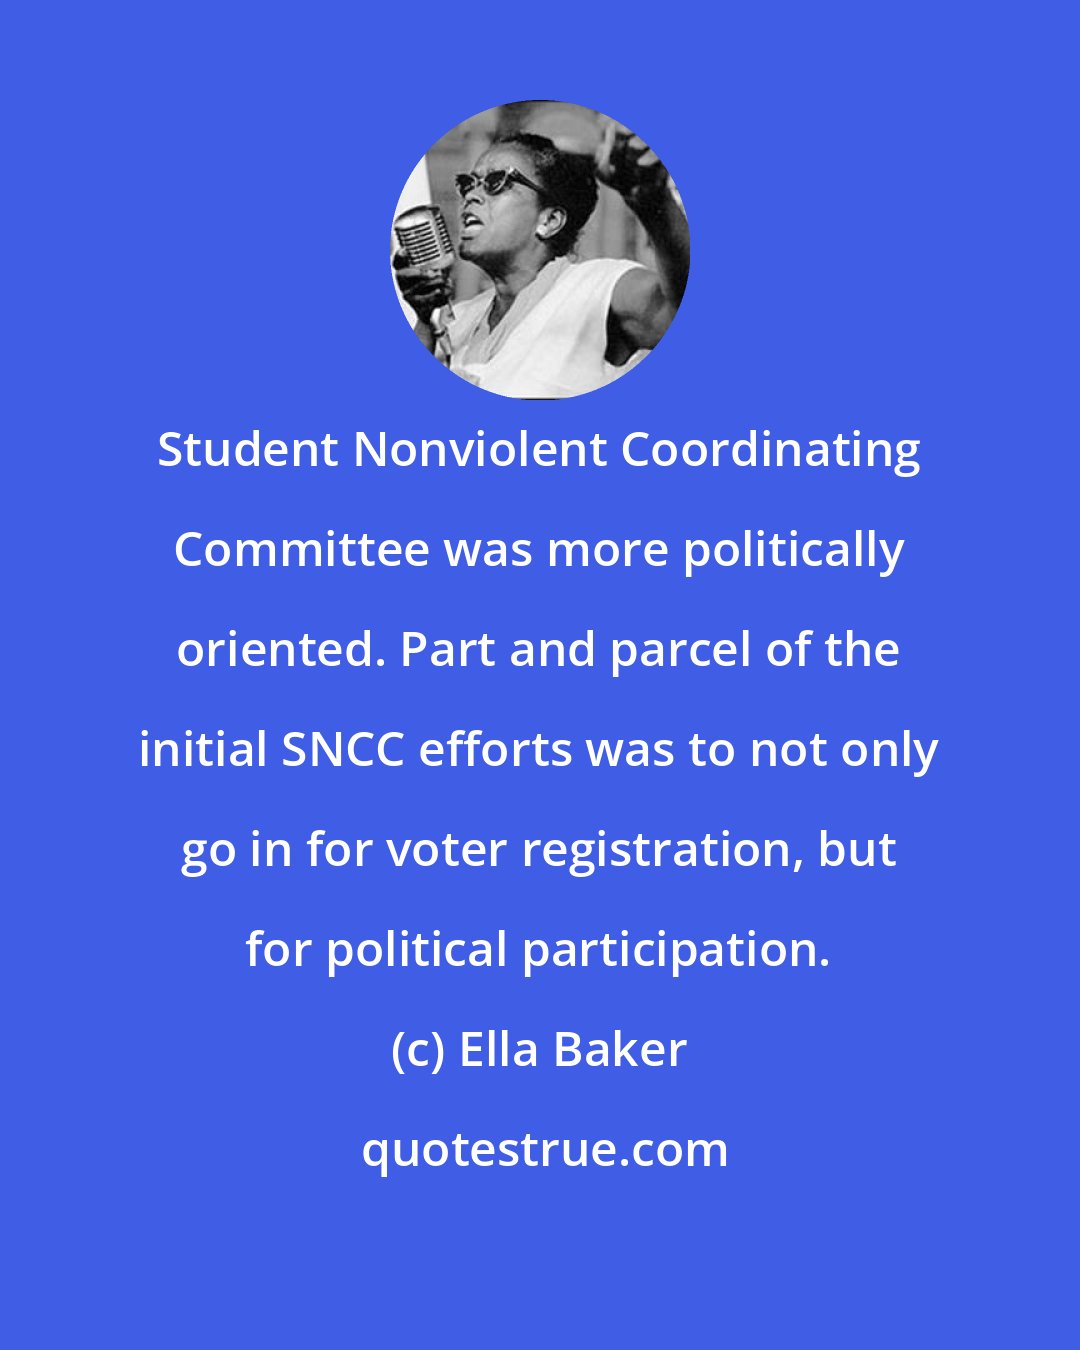 Ella Baker: Student Nonviolent Coordinating Committee was more politically oriented. Part and parcel of the initial SNCC efforts was to not only go in for voter registration, but for political participation.